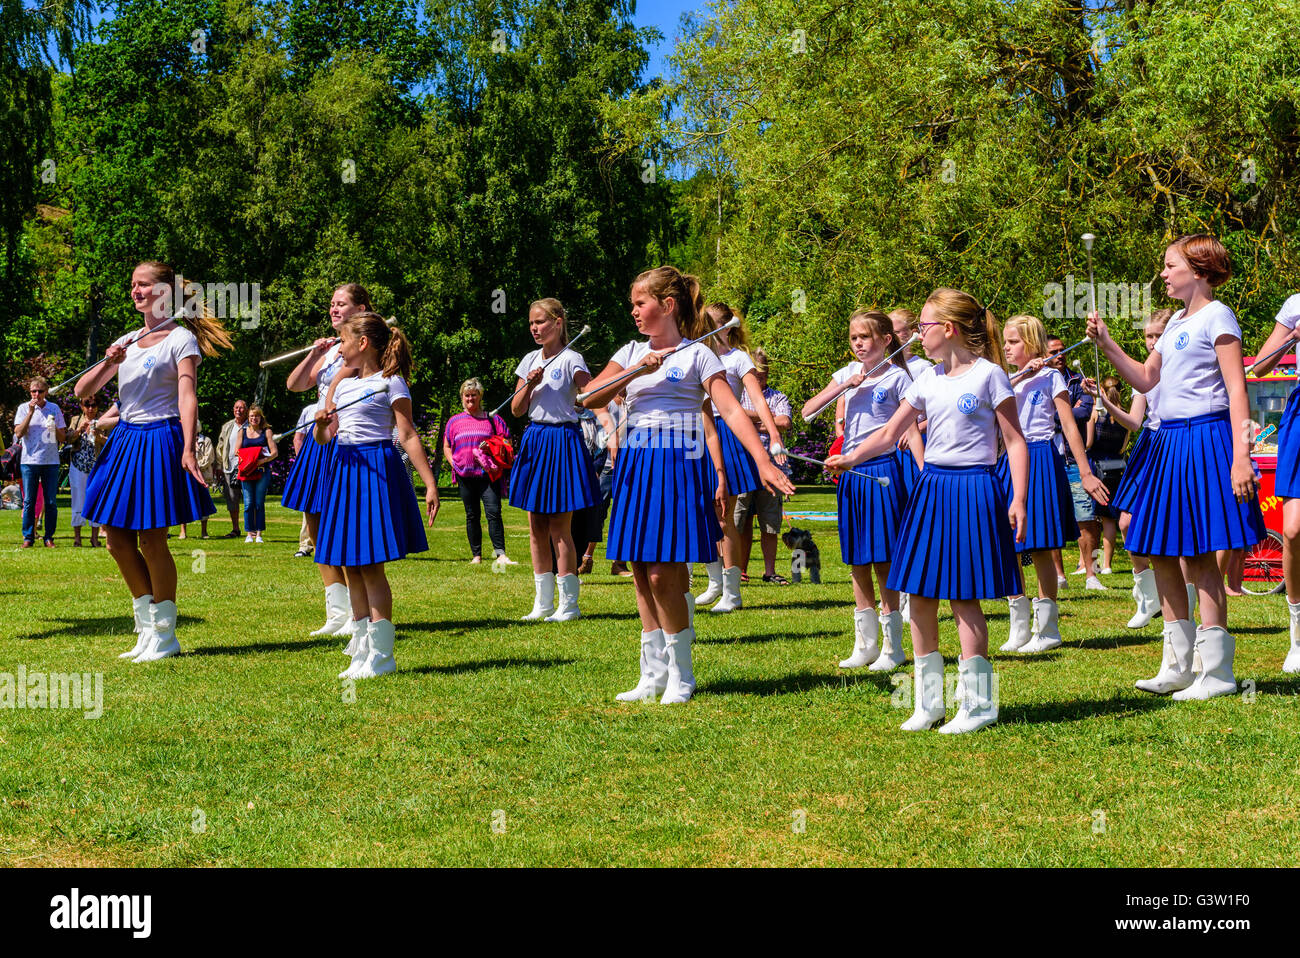 Ronneby, Sweden - June 6, 2016: The Swedish national day celebration in public park. Majorette dancers performing with batons. S Stock Photo